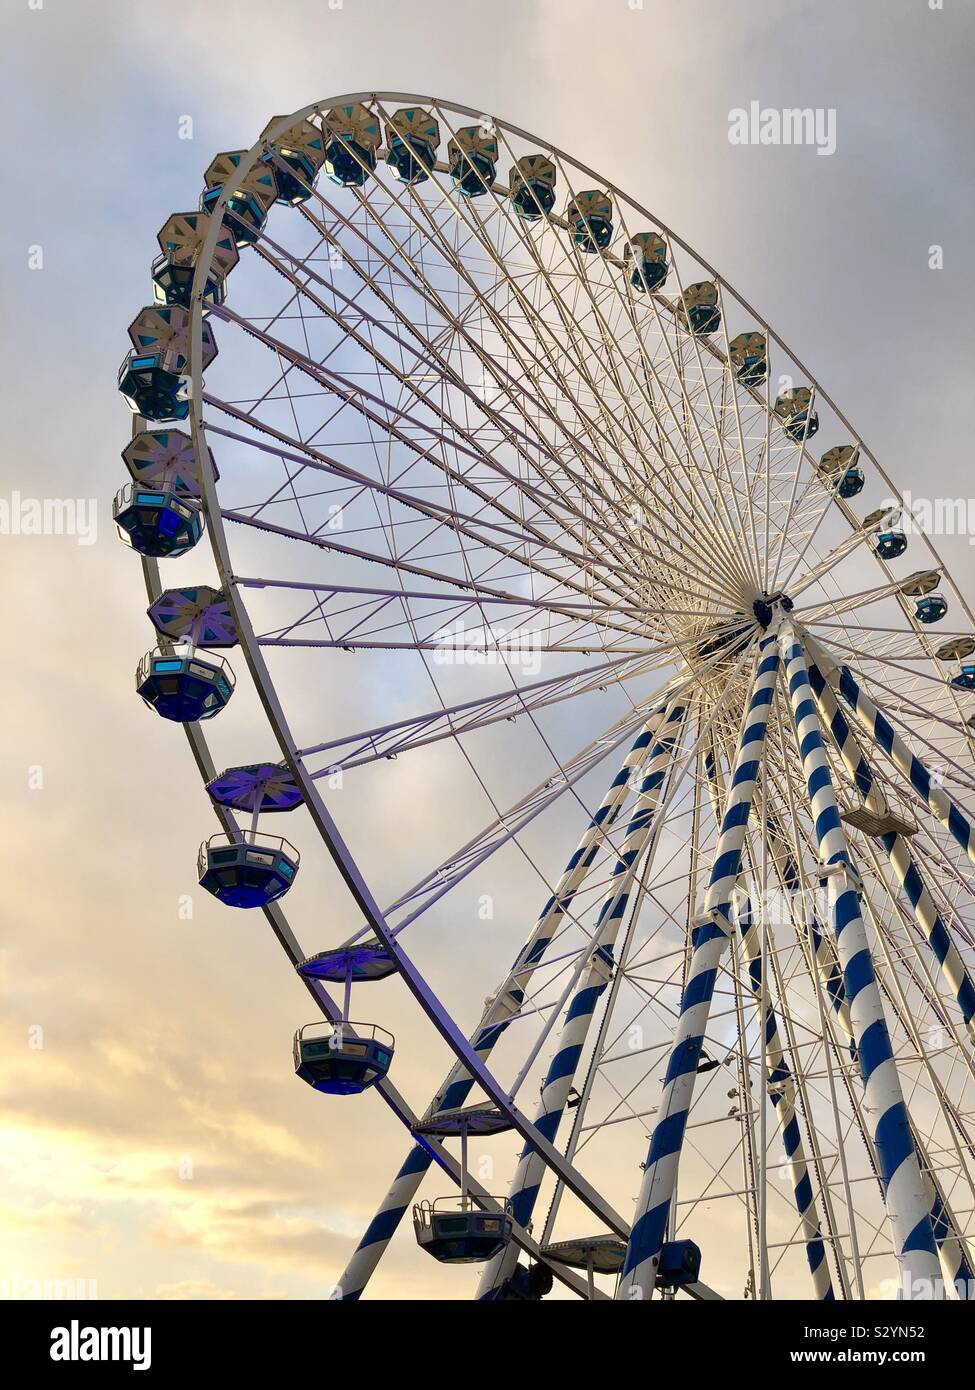 Ferris wheel at sunset in Arcachon seaside town, France. 31st October 2019 Stock Photo